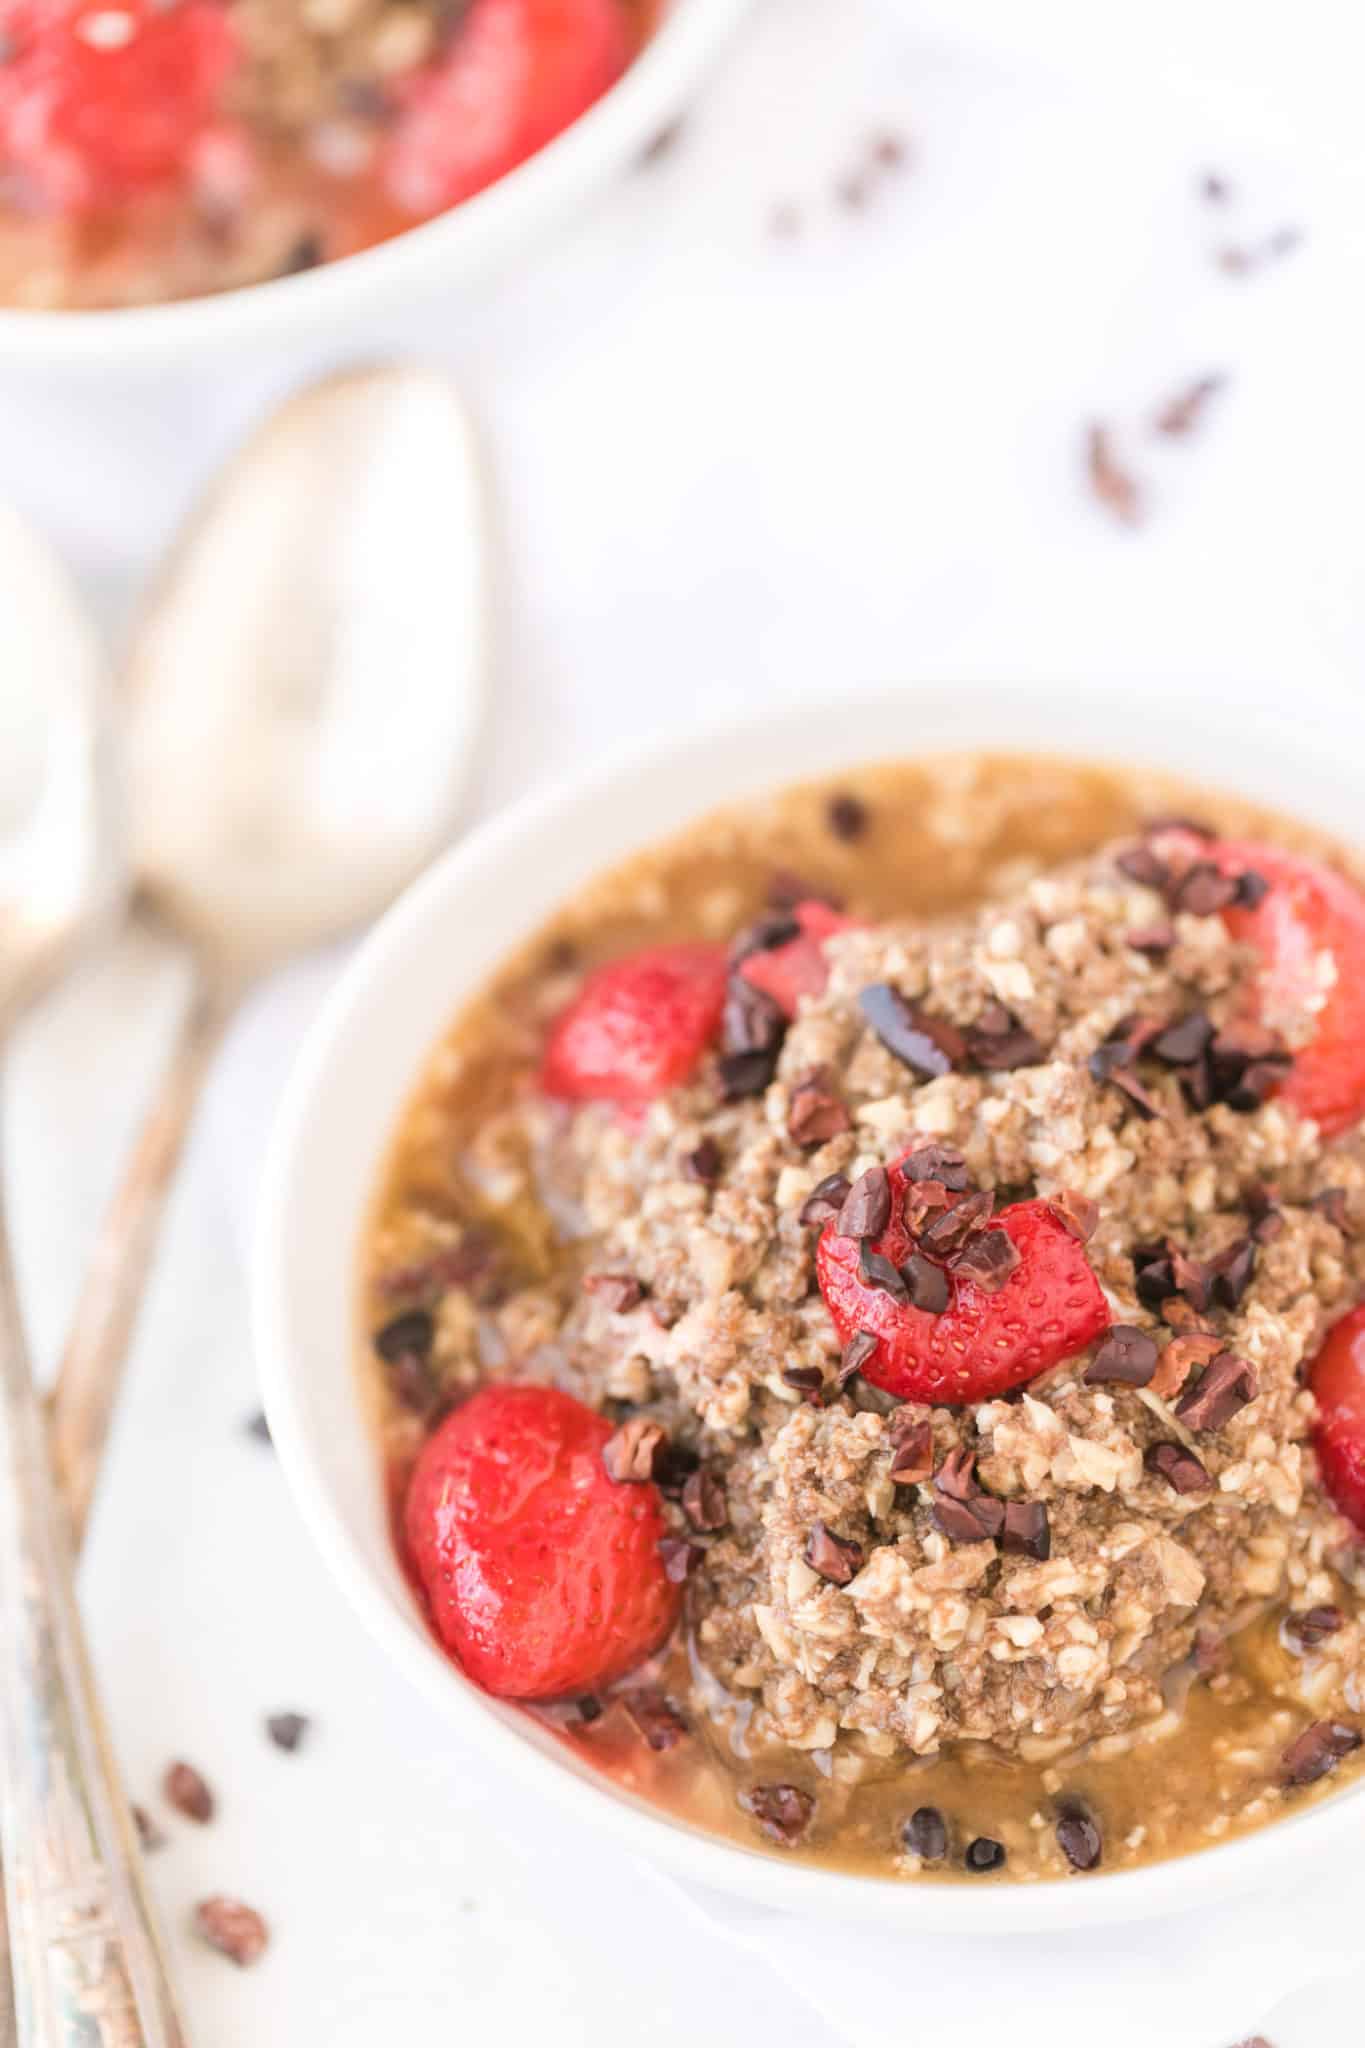 cauliflower oats served with strawberries and cacao nibs.